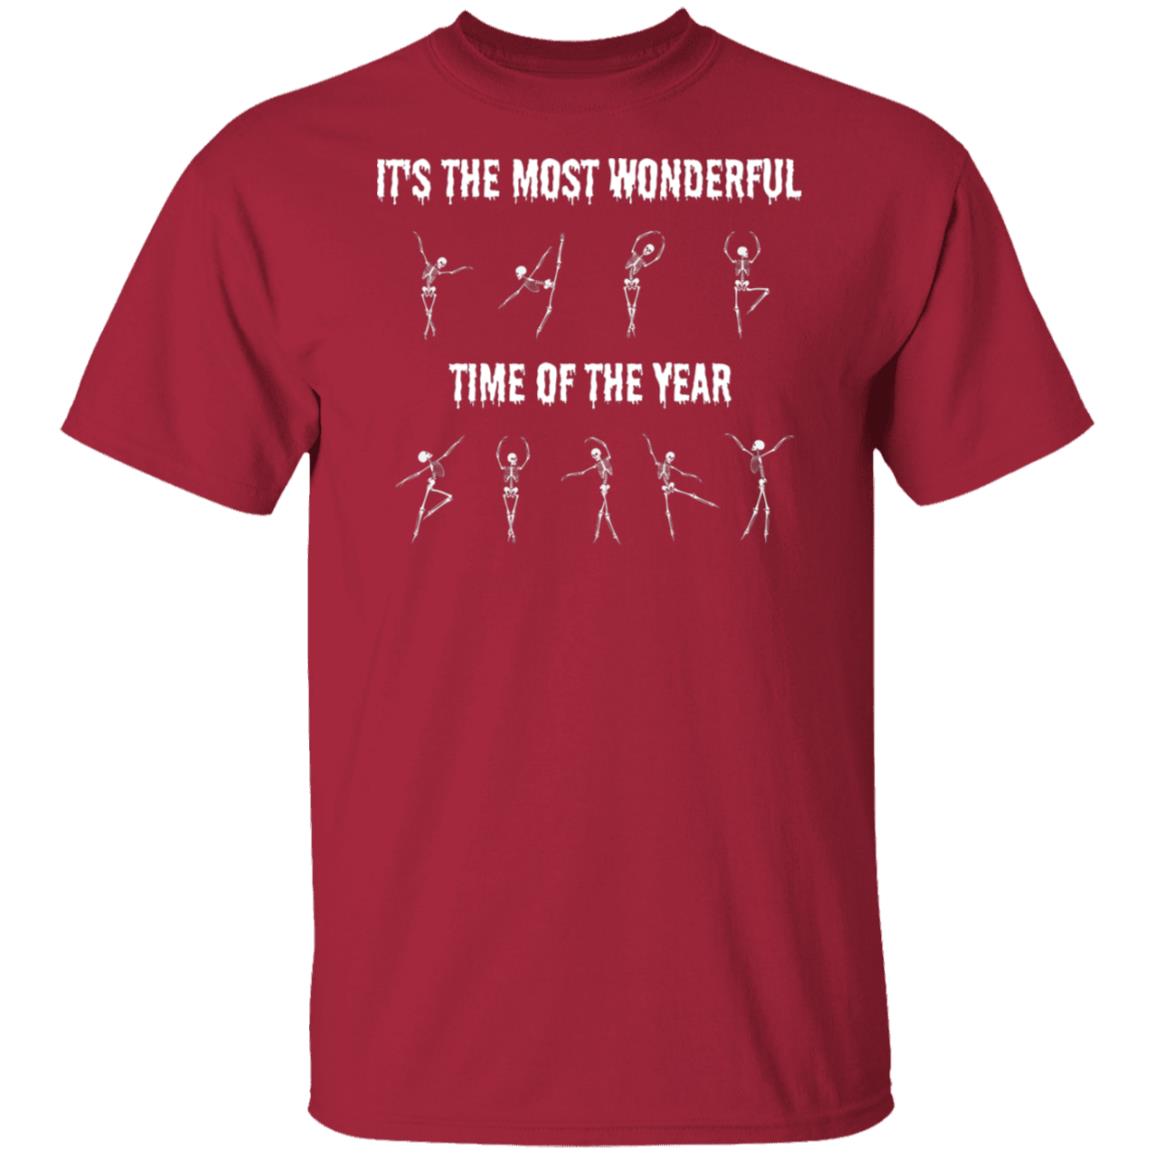 It's most wonderful time of the year Halloween T Shirt